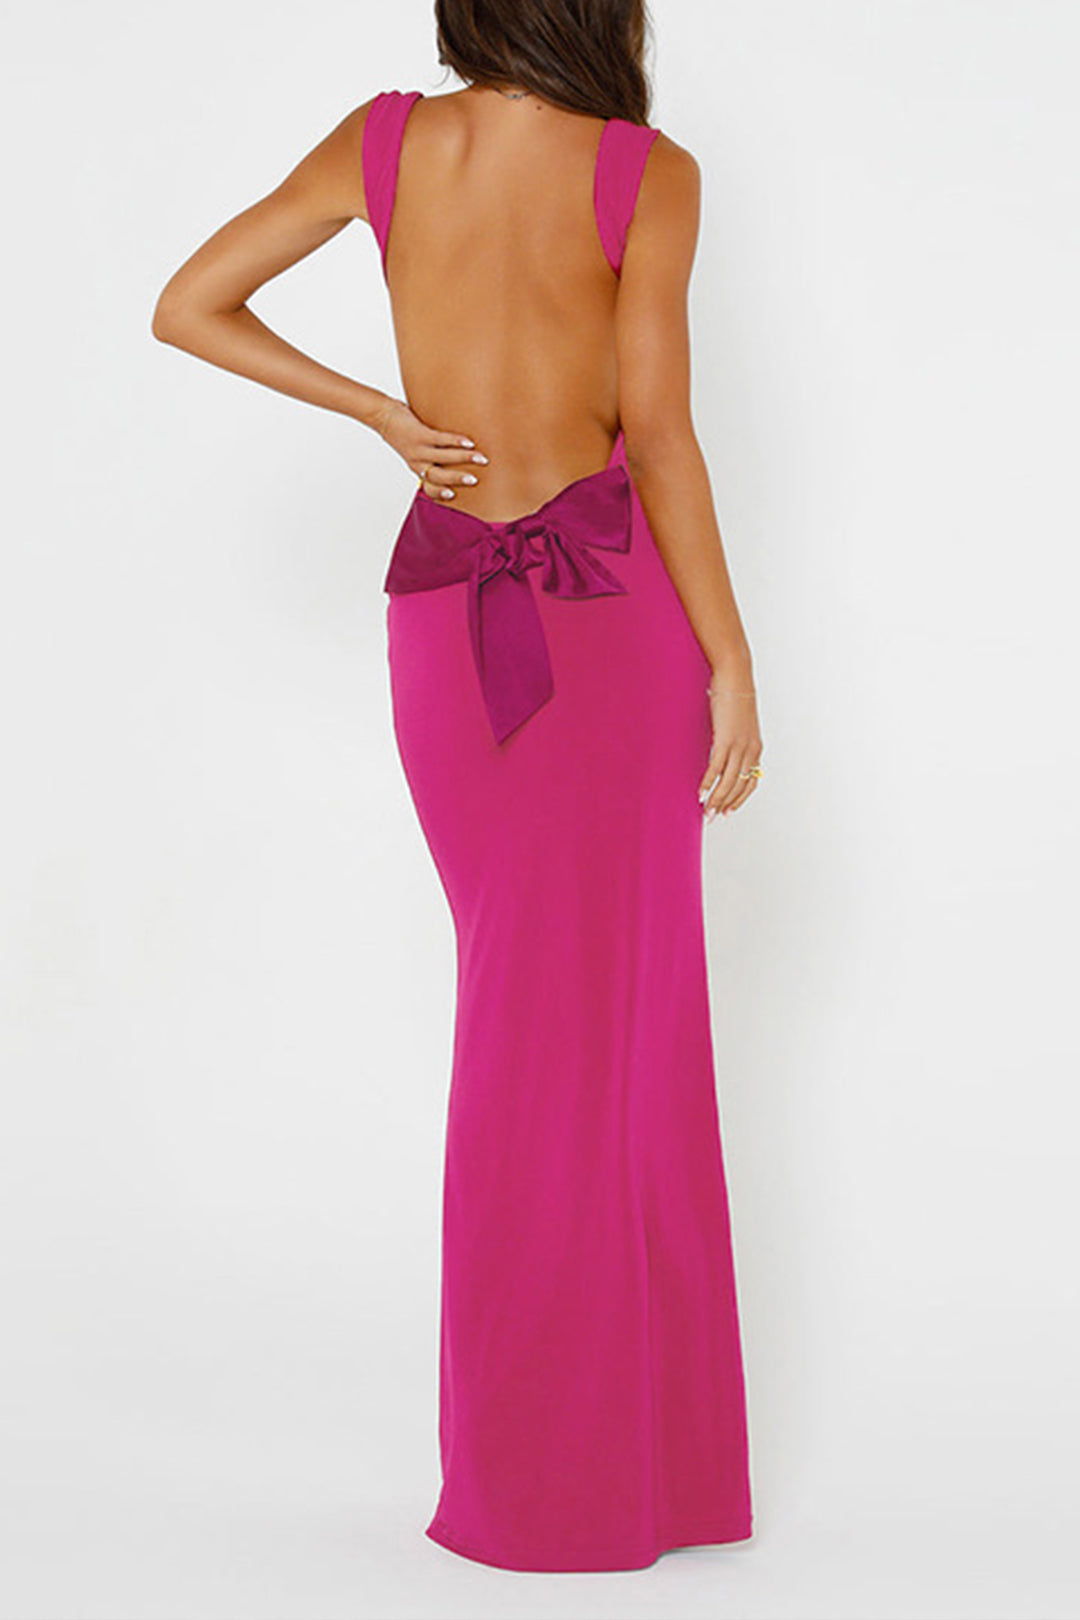 Bow Backless Cowl Neck Maxi Dress